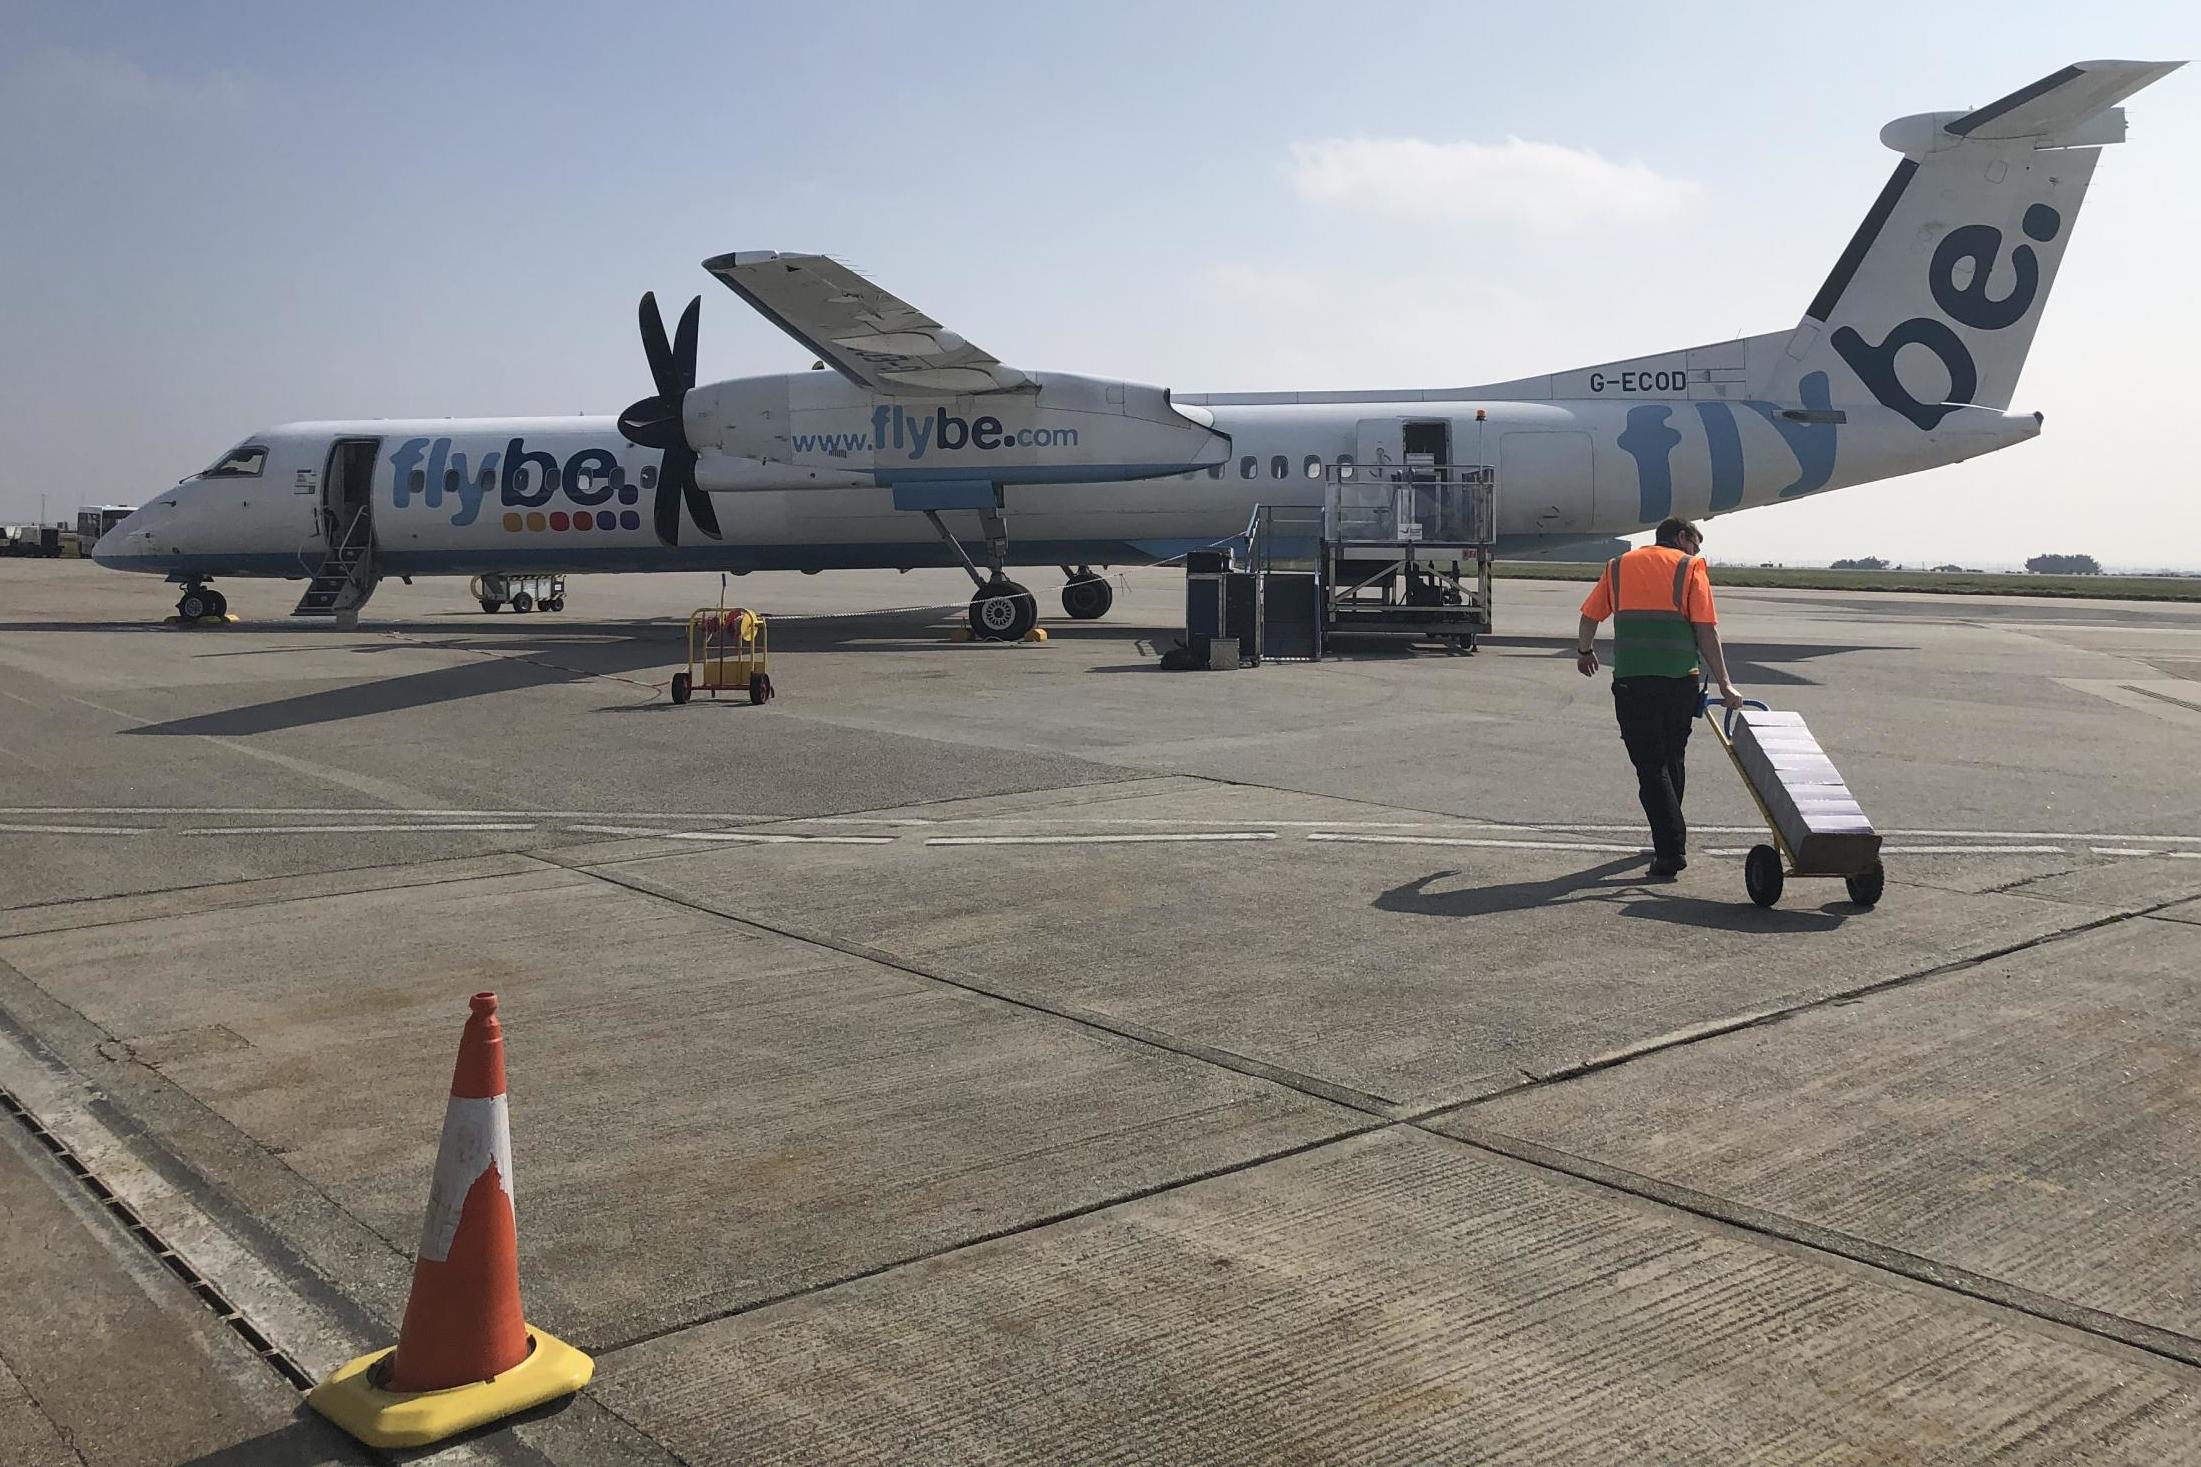 Flybe's link from Heathrow to Newquay is in doubt